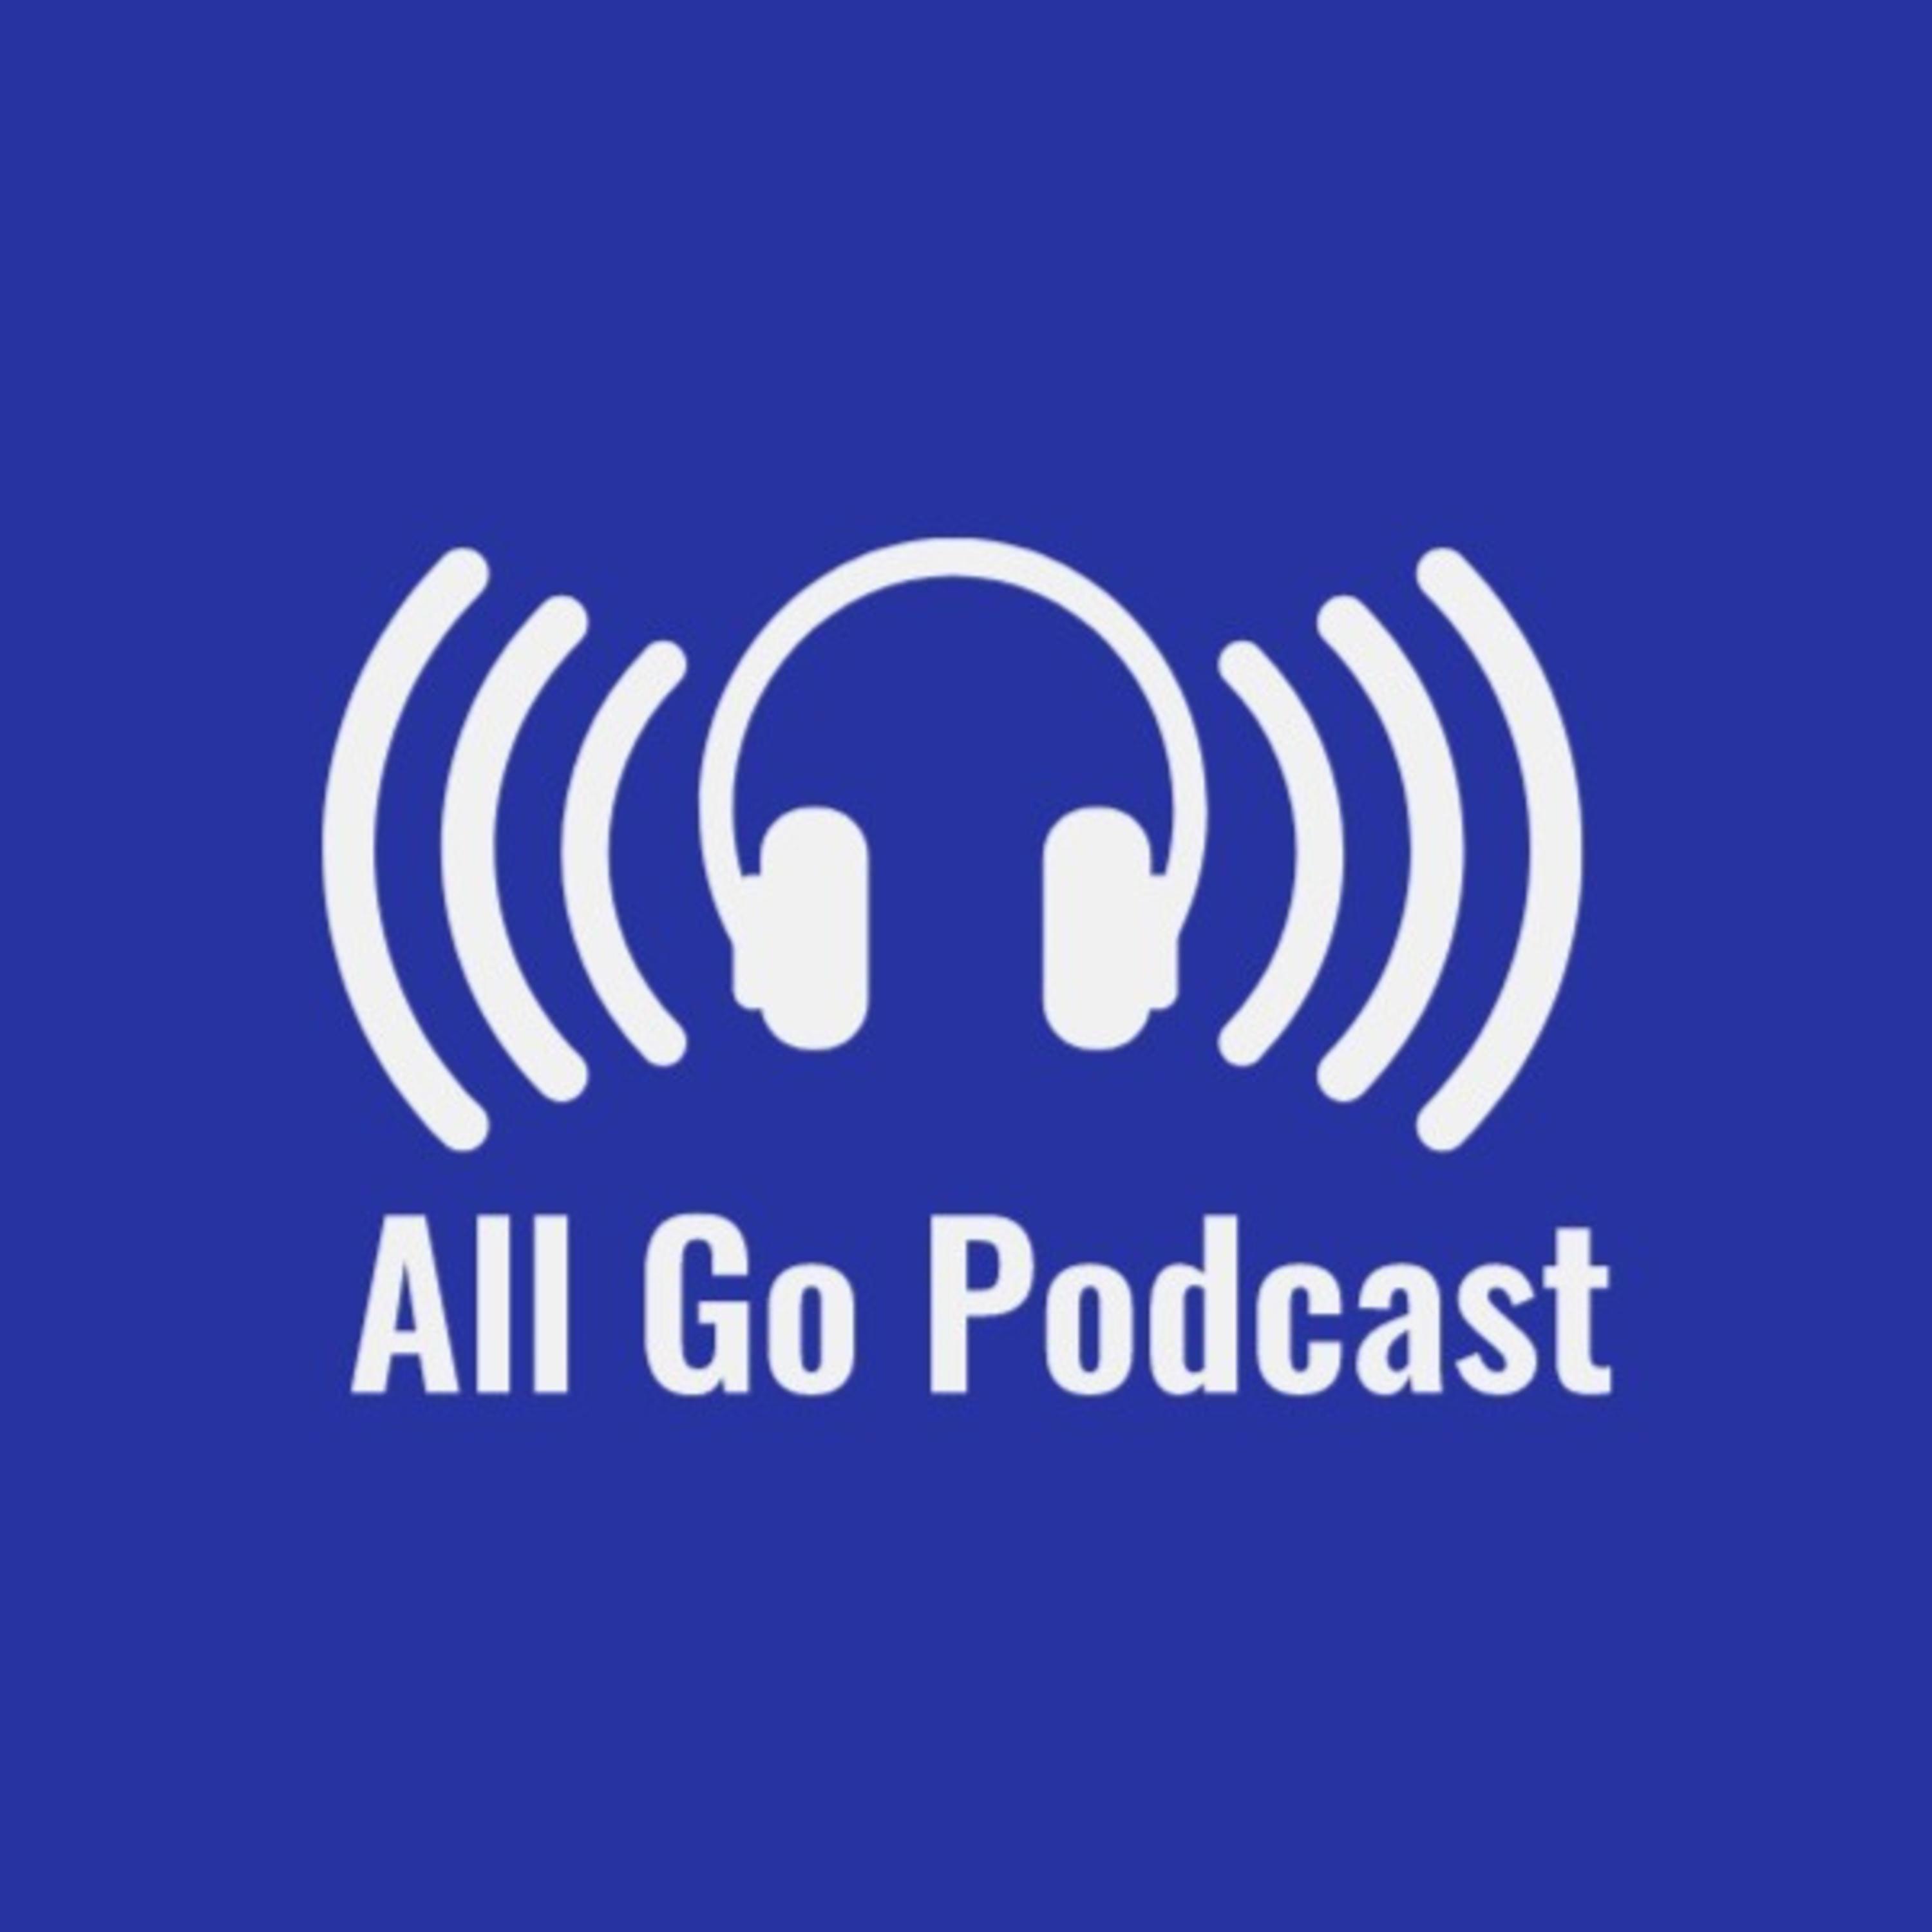 The All Go Podcast